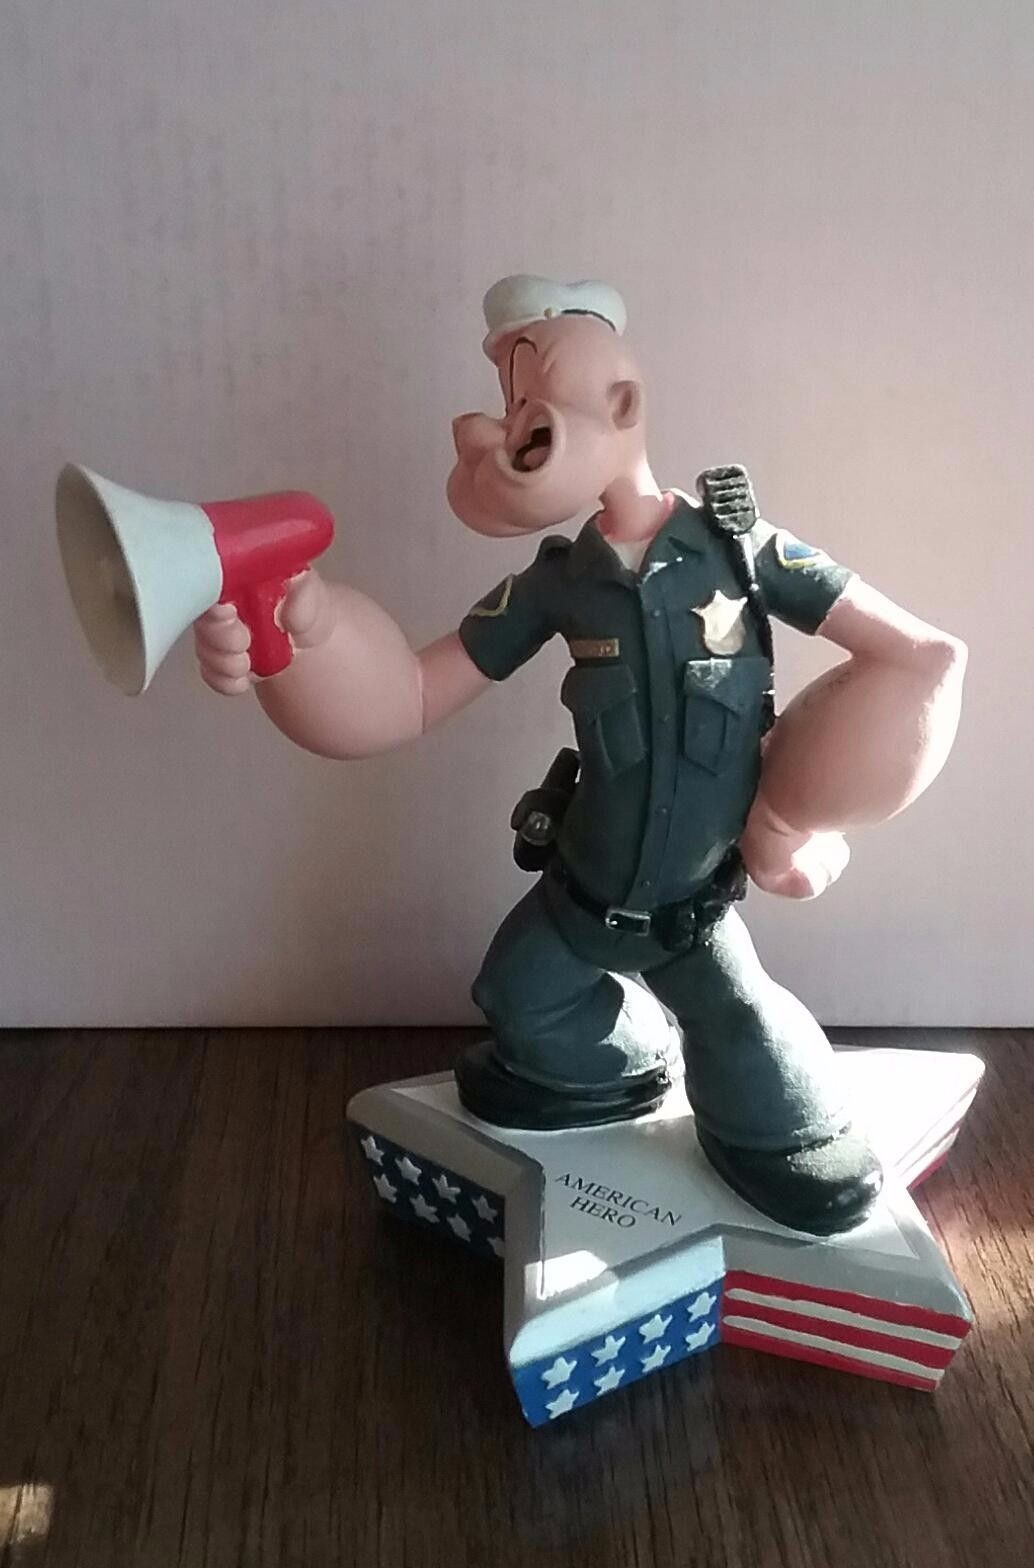 Extremely Rare Popeye as Police Officer Figurine Limited Edition of 3600 Statue